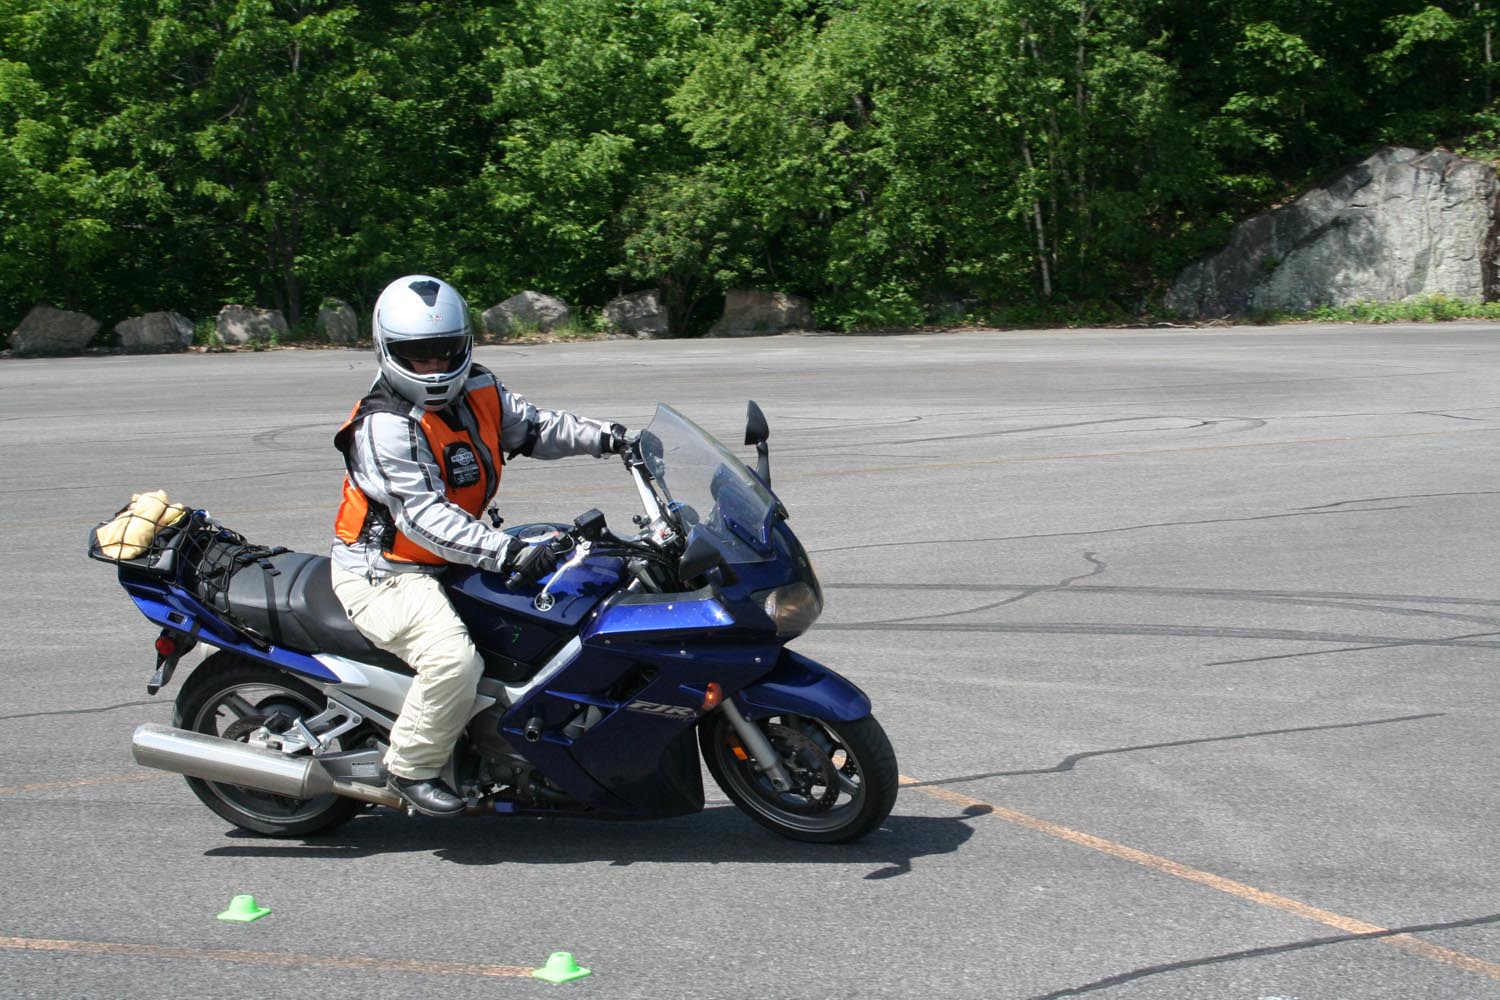 Jerry riding a demo in an MSF class.